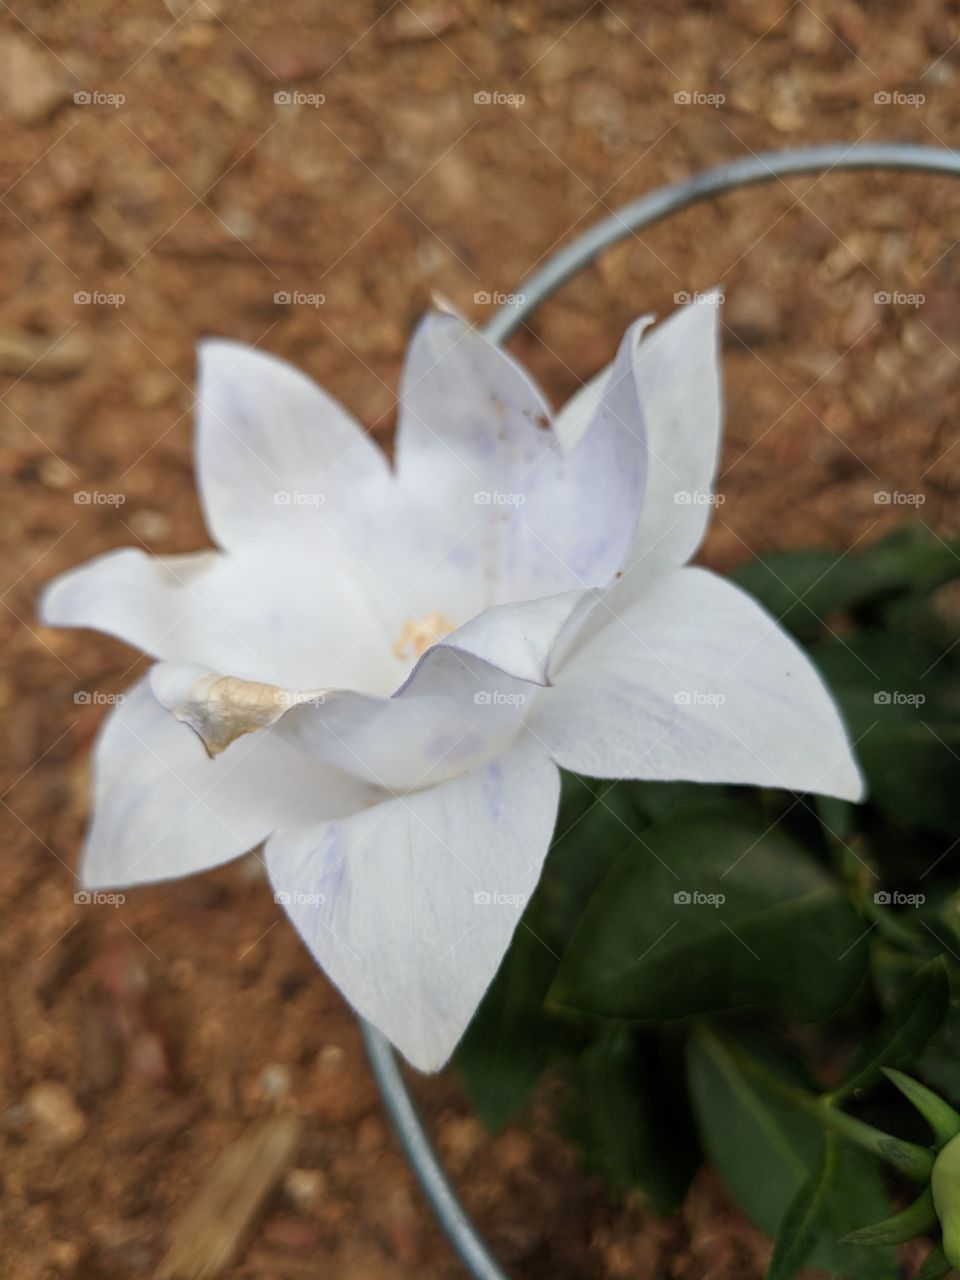 A small white flower captured in my own garden. For anyone who likes elegance and beauty, this one will definitely have a nice spot in your collection!